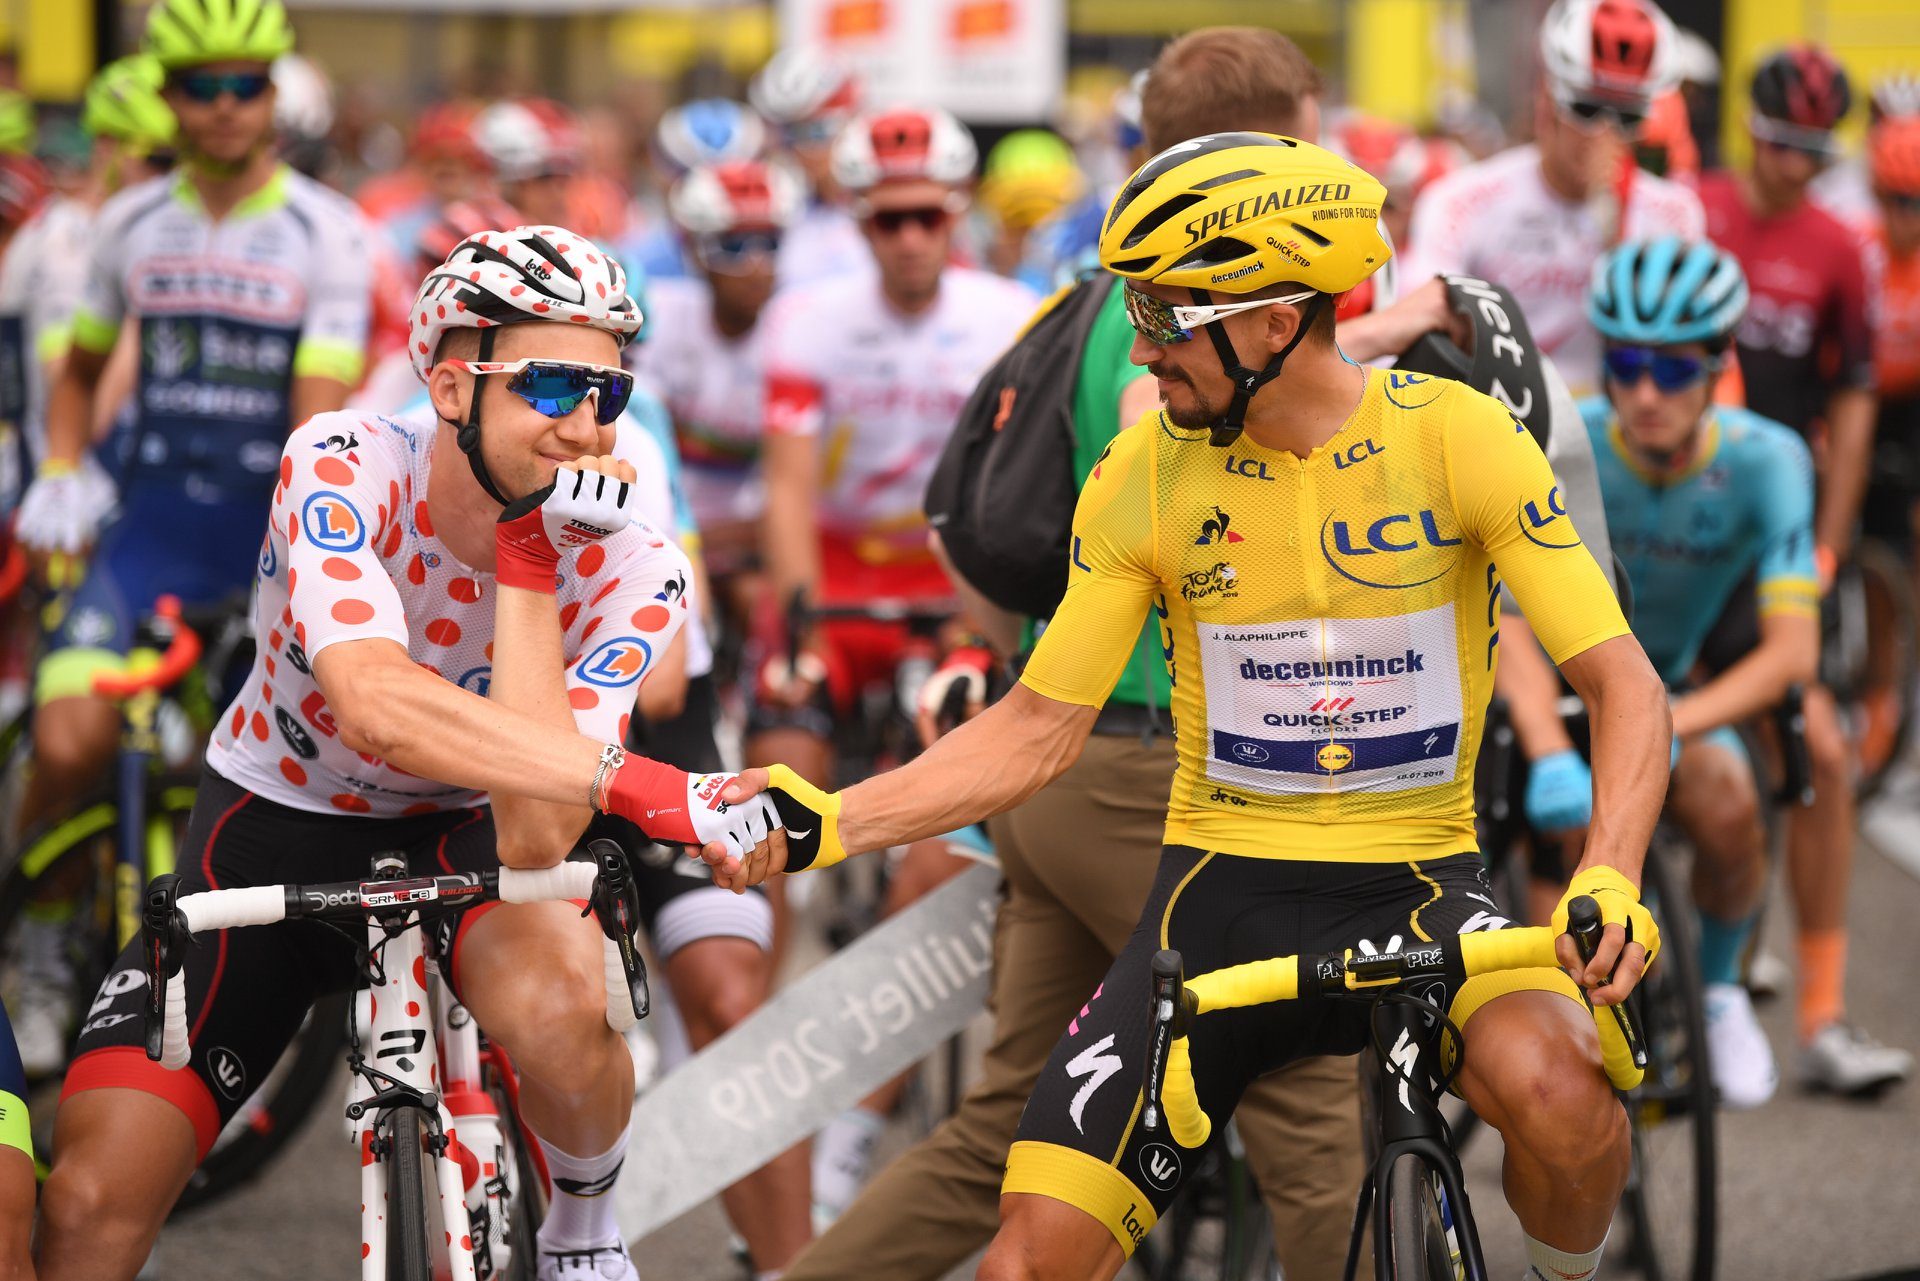 olbg tour de france betting tips and thoughts on improving